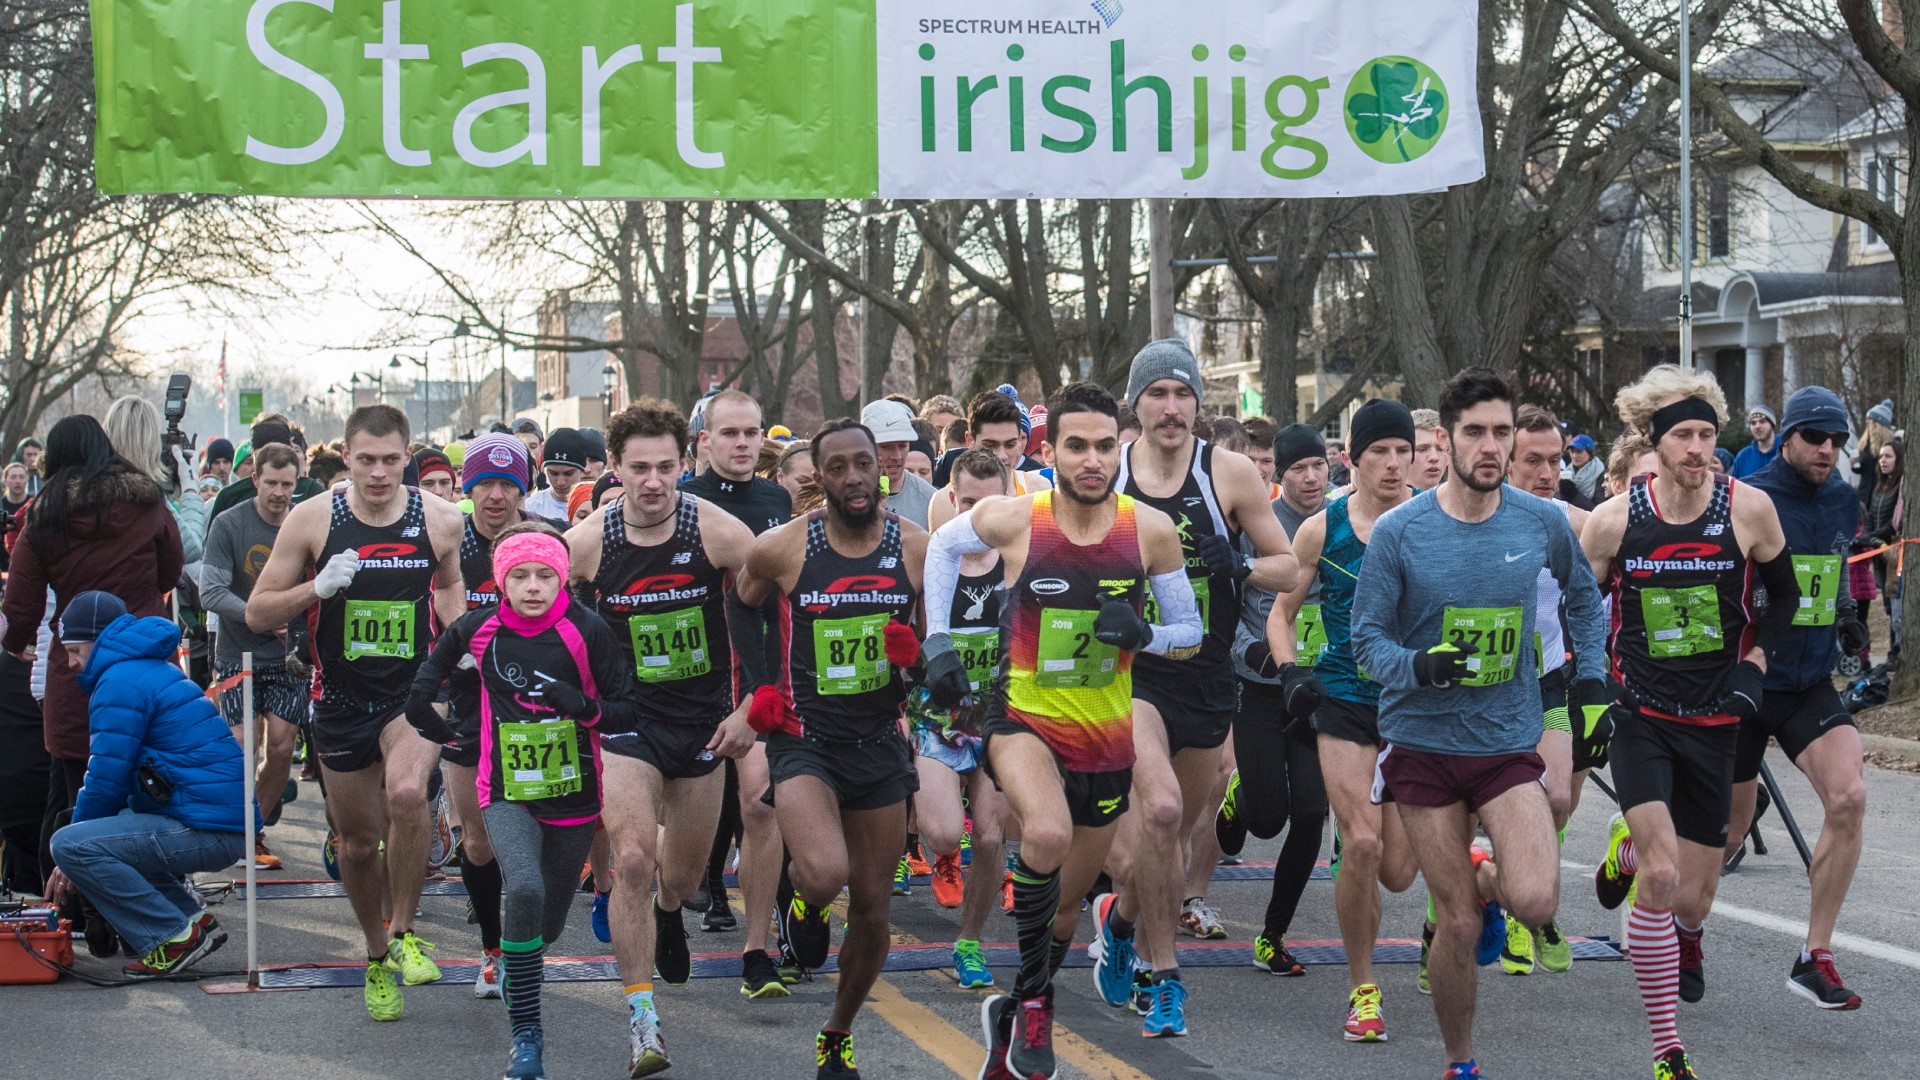 The Irish Jig 5K is a great way to kick off your running season while raising awareness for colorectal cancer and screenings.